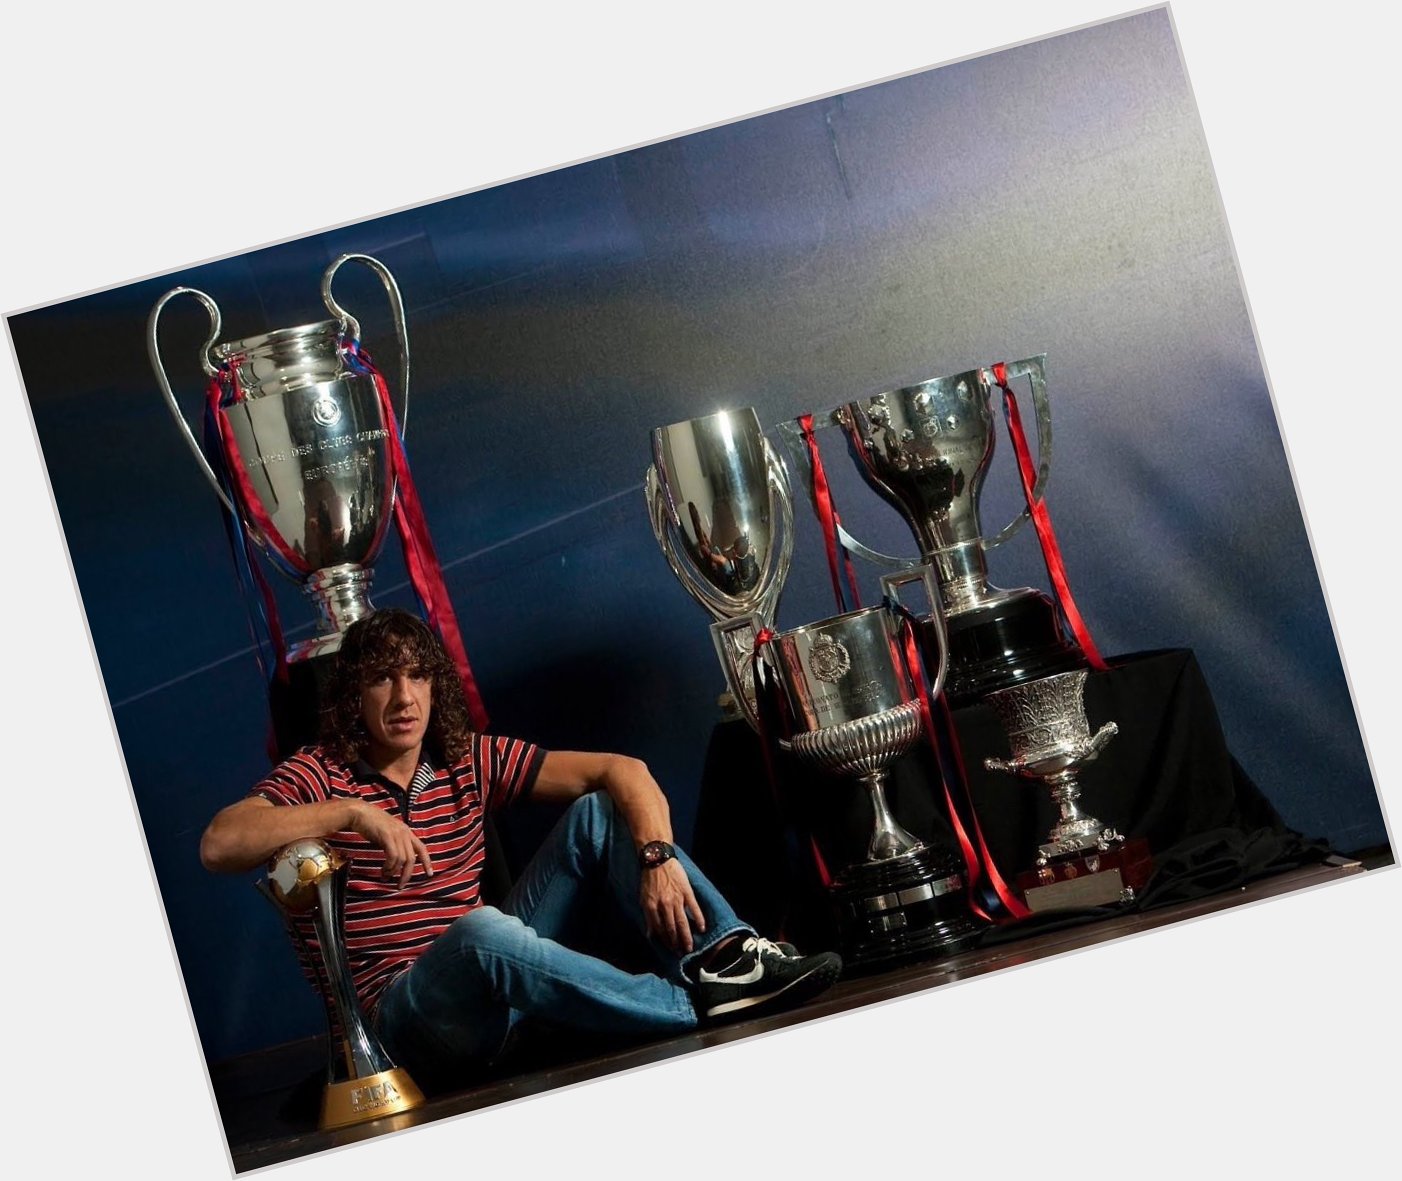  | Happy Birthday and Congratulations to former FC Barcelona\s defender, Carles Puyol, who turns 41 today. 